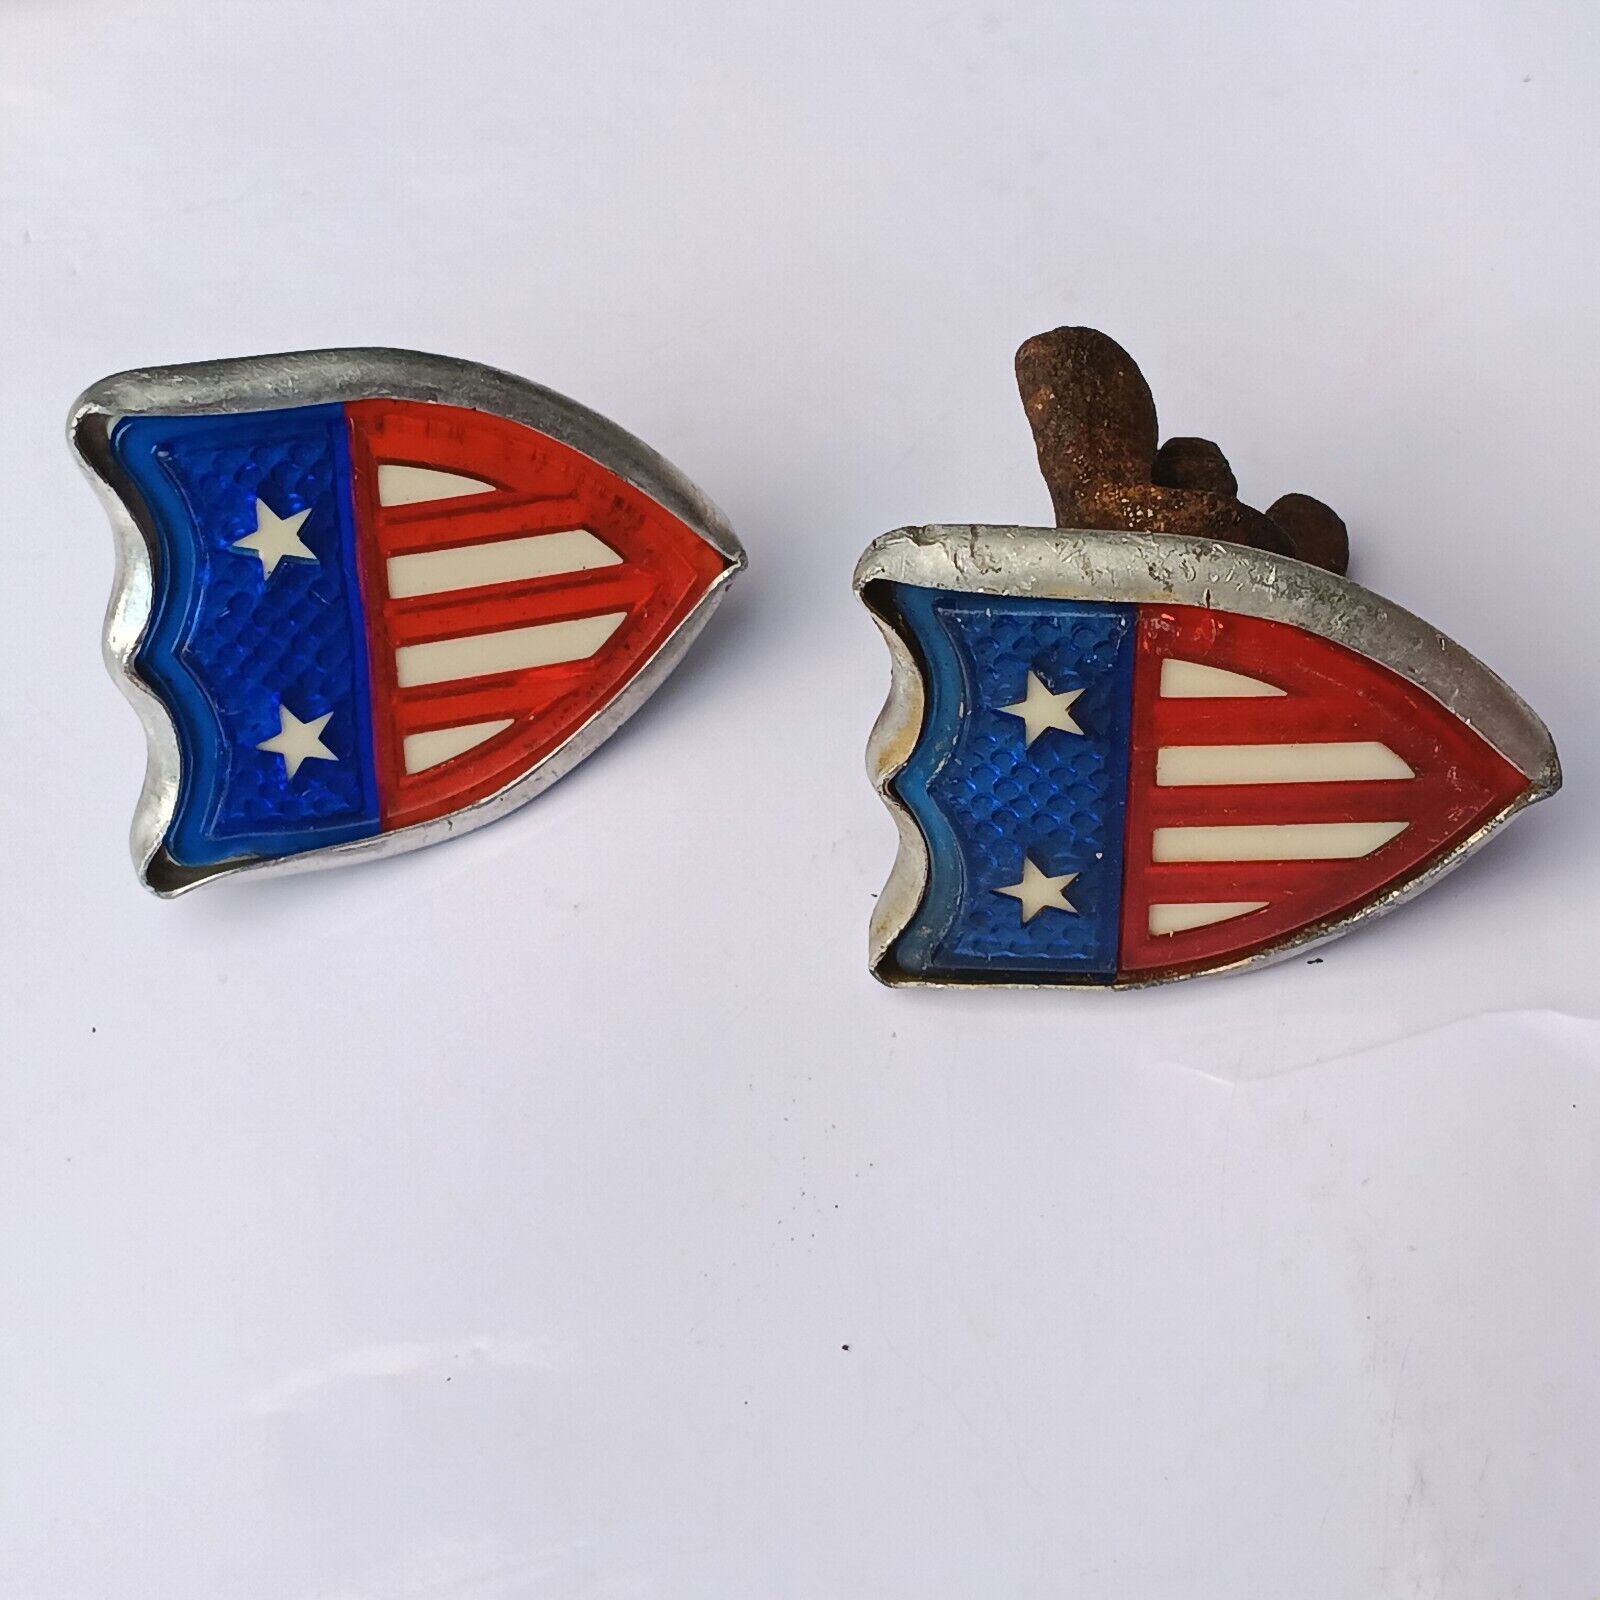 2 Vtg 1950s era used Automobile motorcycle Flag 2 Star License Plate Fasteners